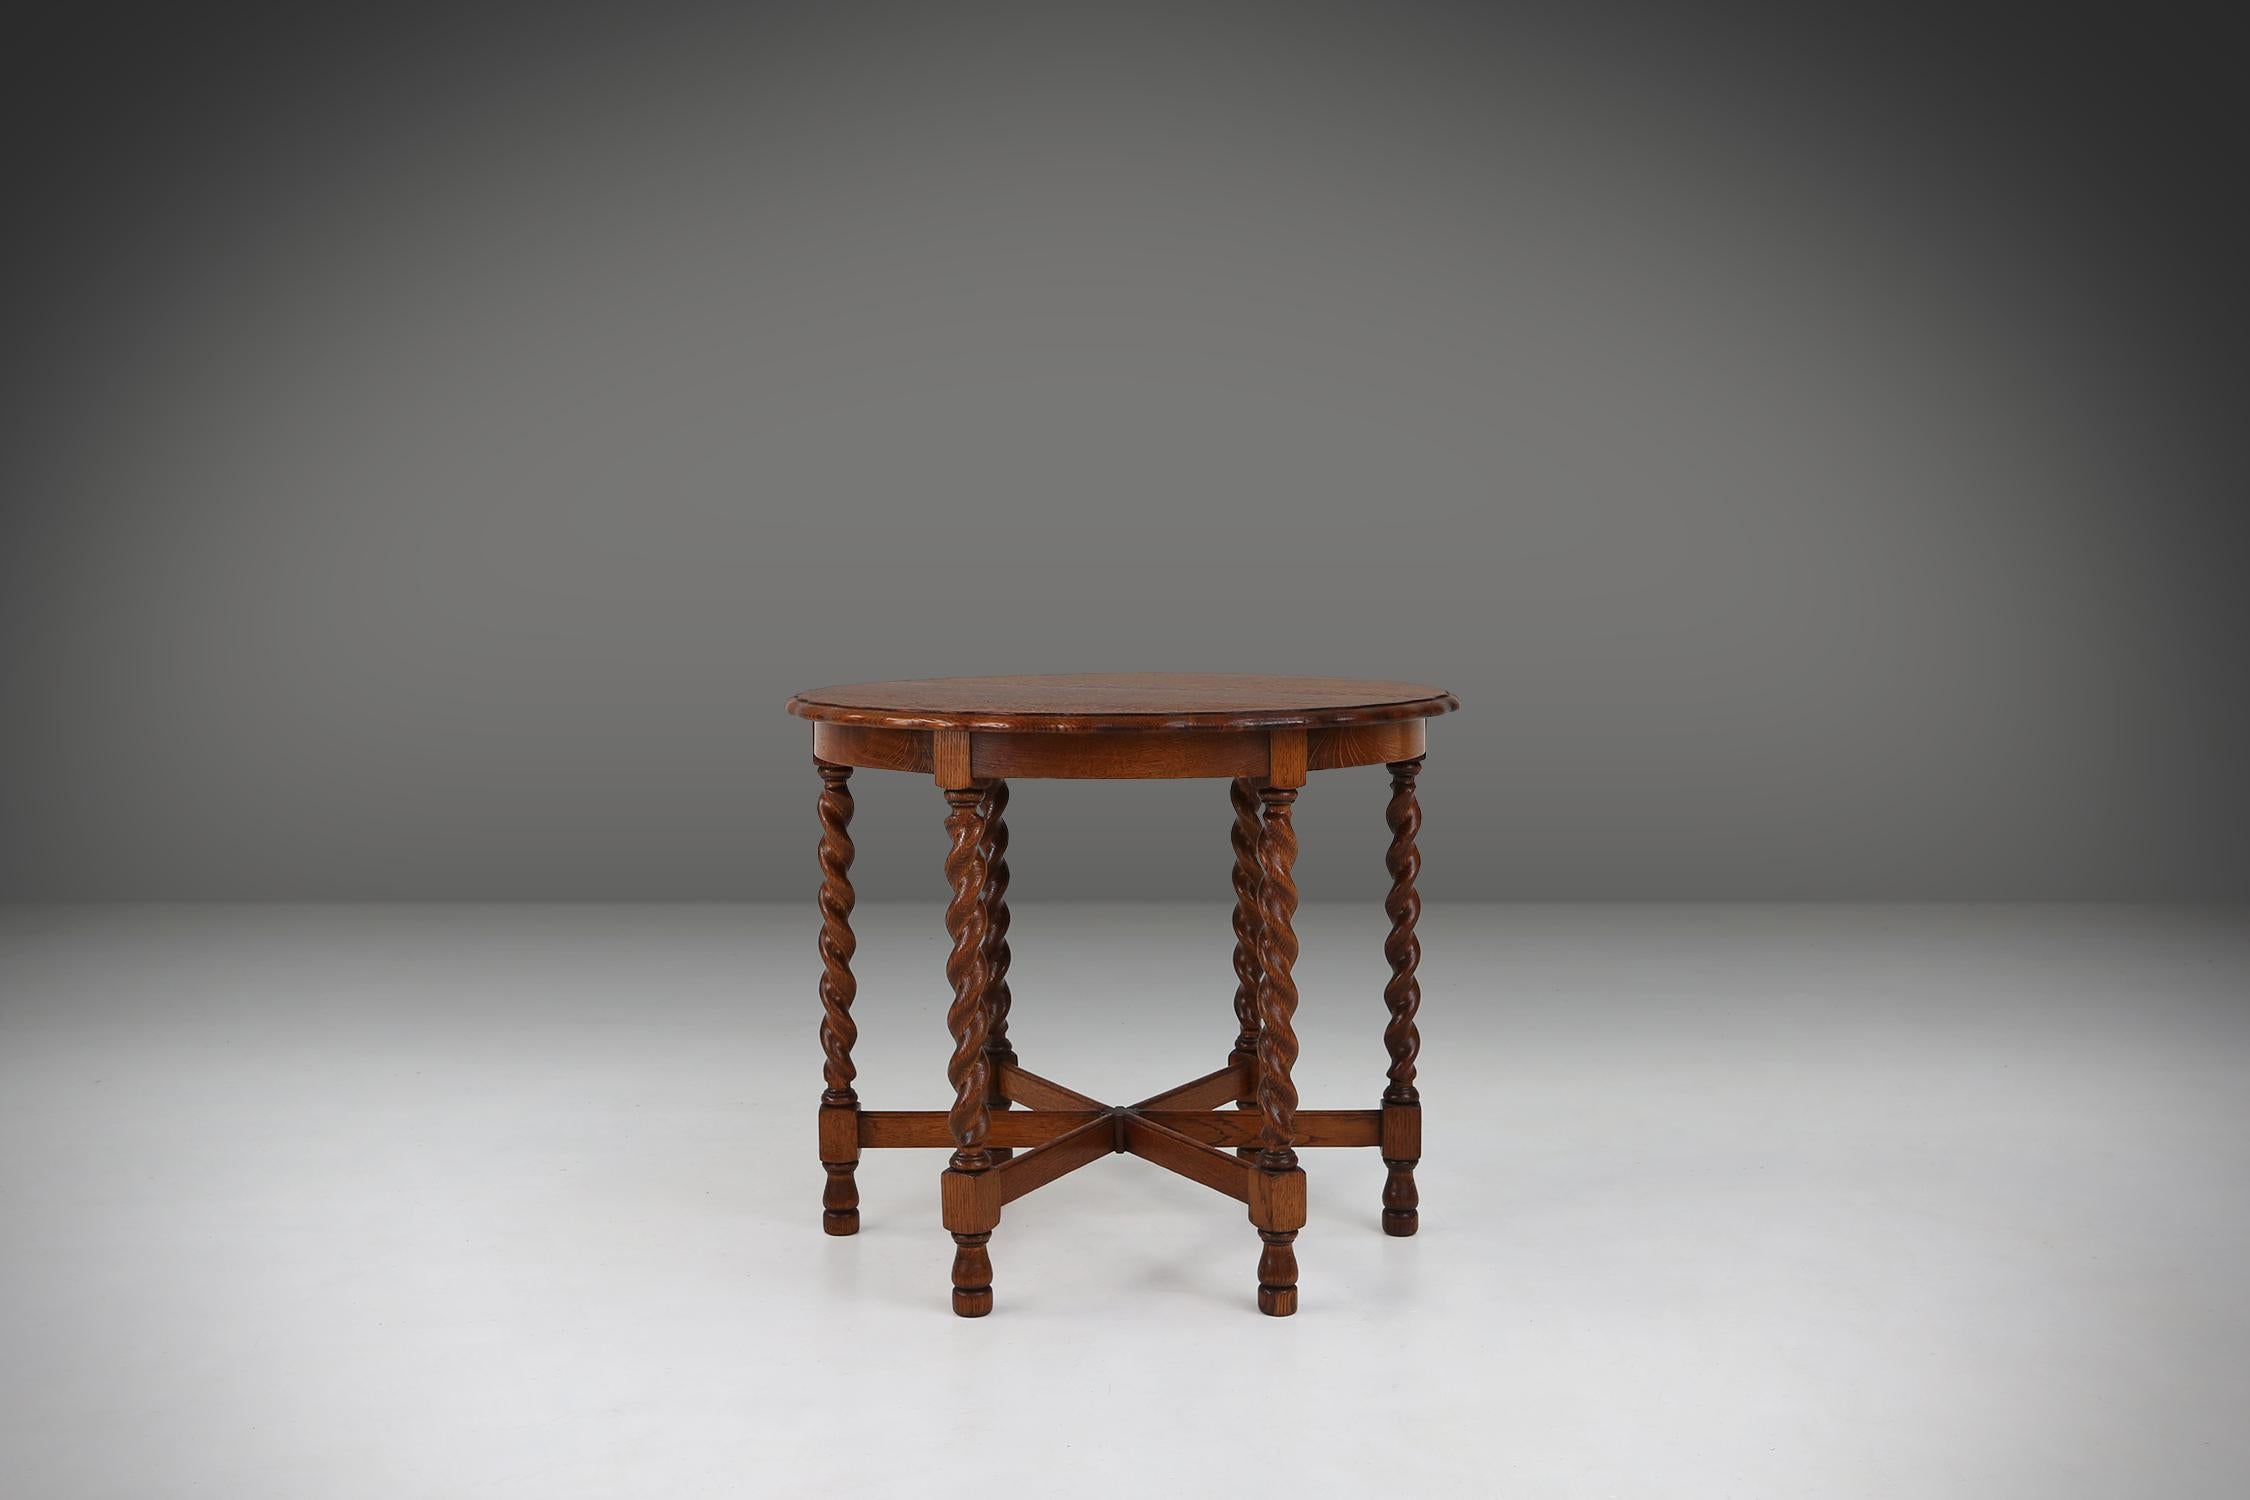 Made from oak around circa 1890, this side table has a beautiful wavy top that gives an elegant look. The six turned legs are a model of craftsmanship and refinement. The wood has a rich, dark hue that is testament to its age and quality.

This side